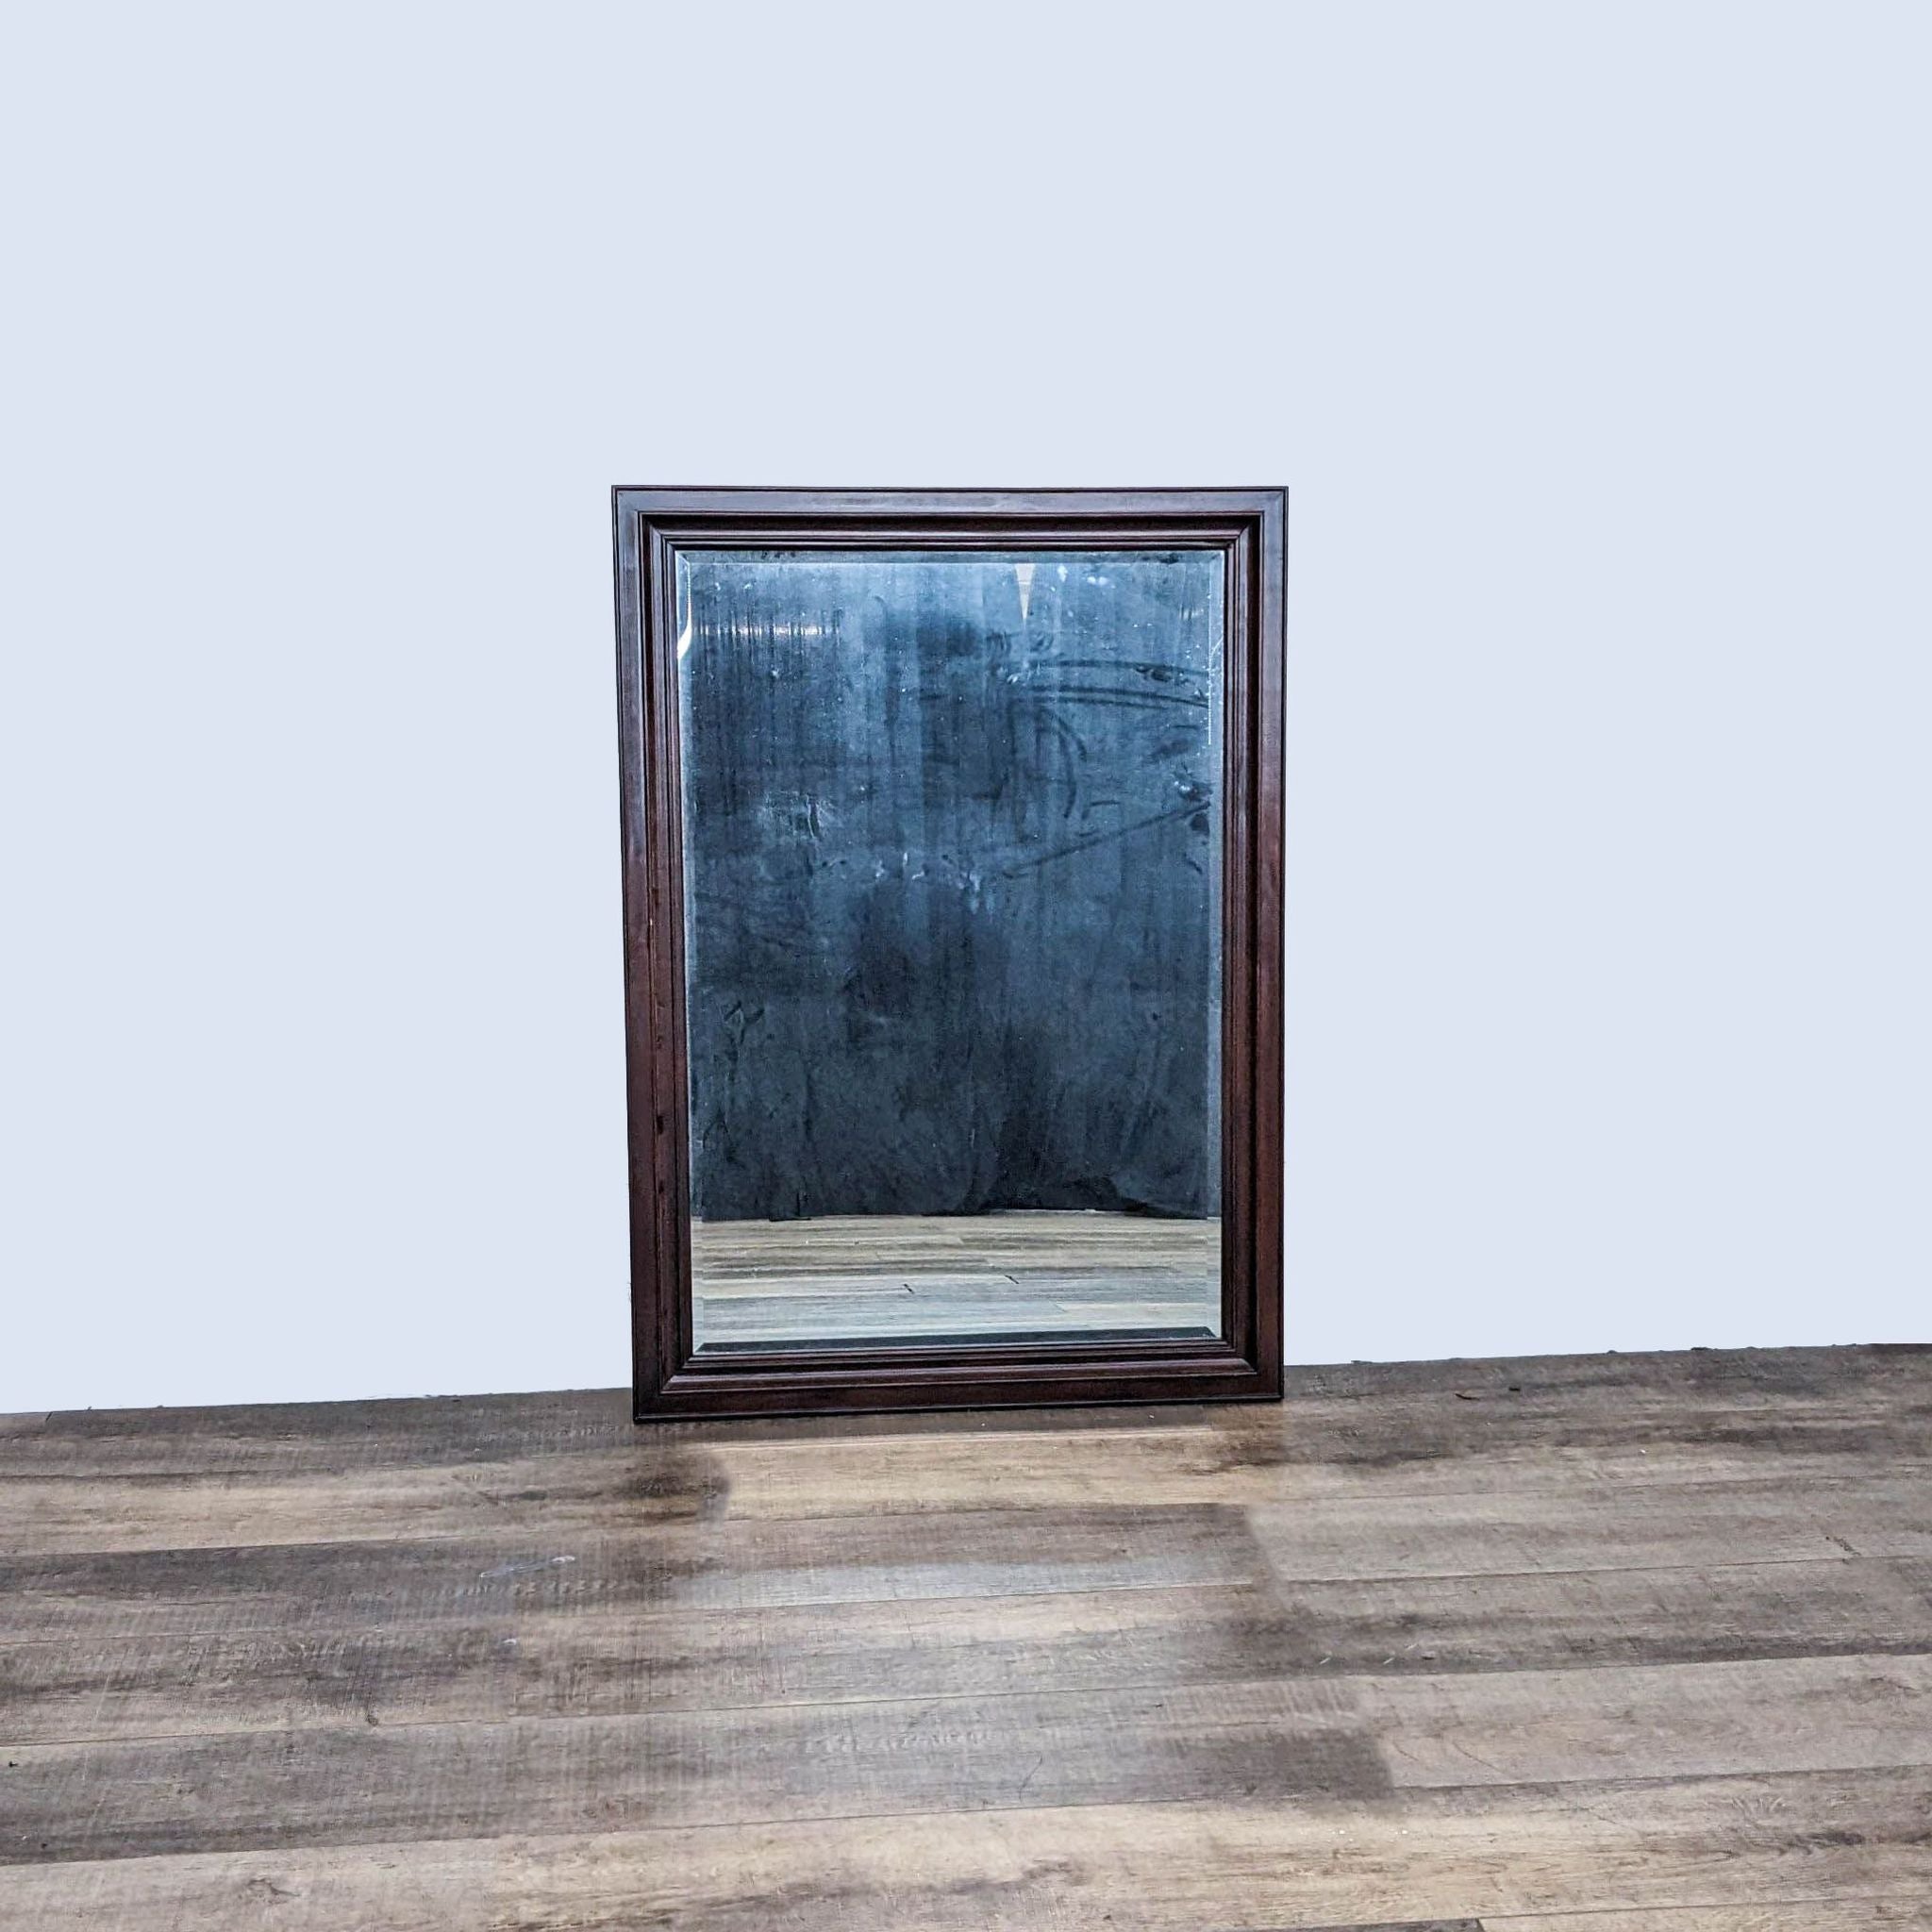 Traditional Reperch wood-framed mirror with beveled edges, standing on a wooden floor against a grey wall.